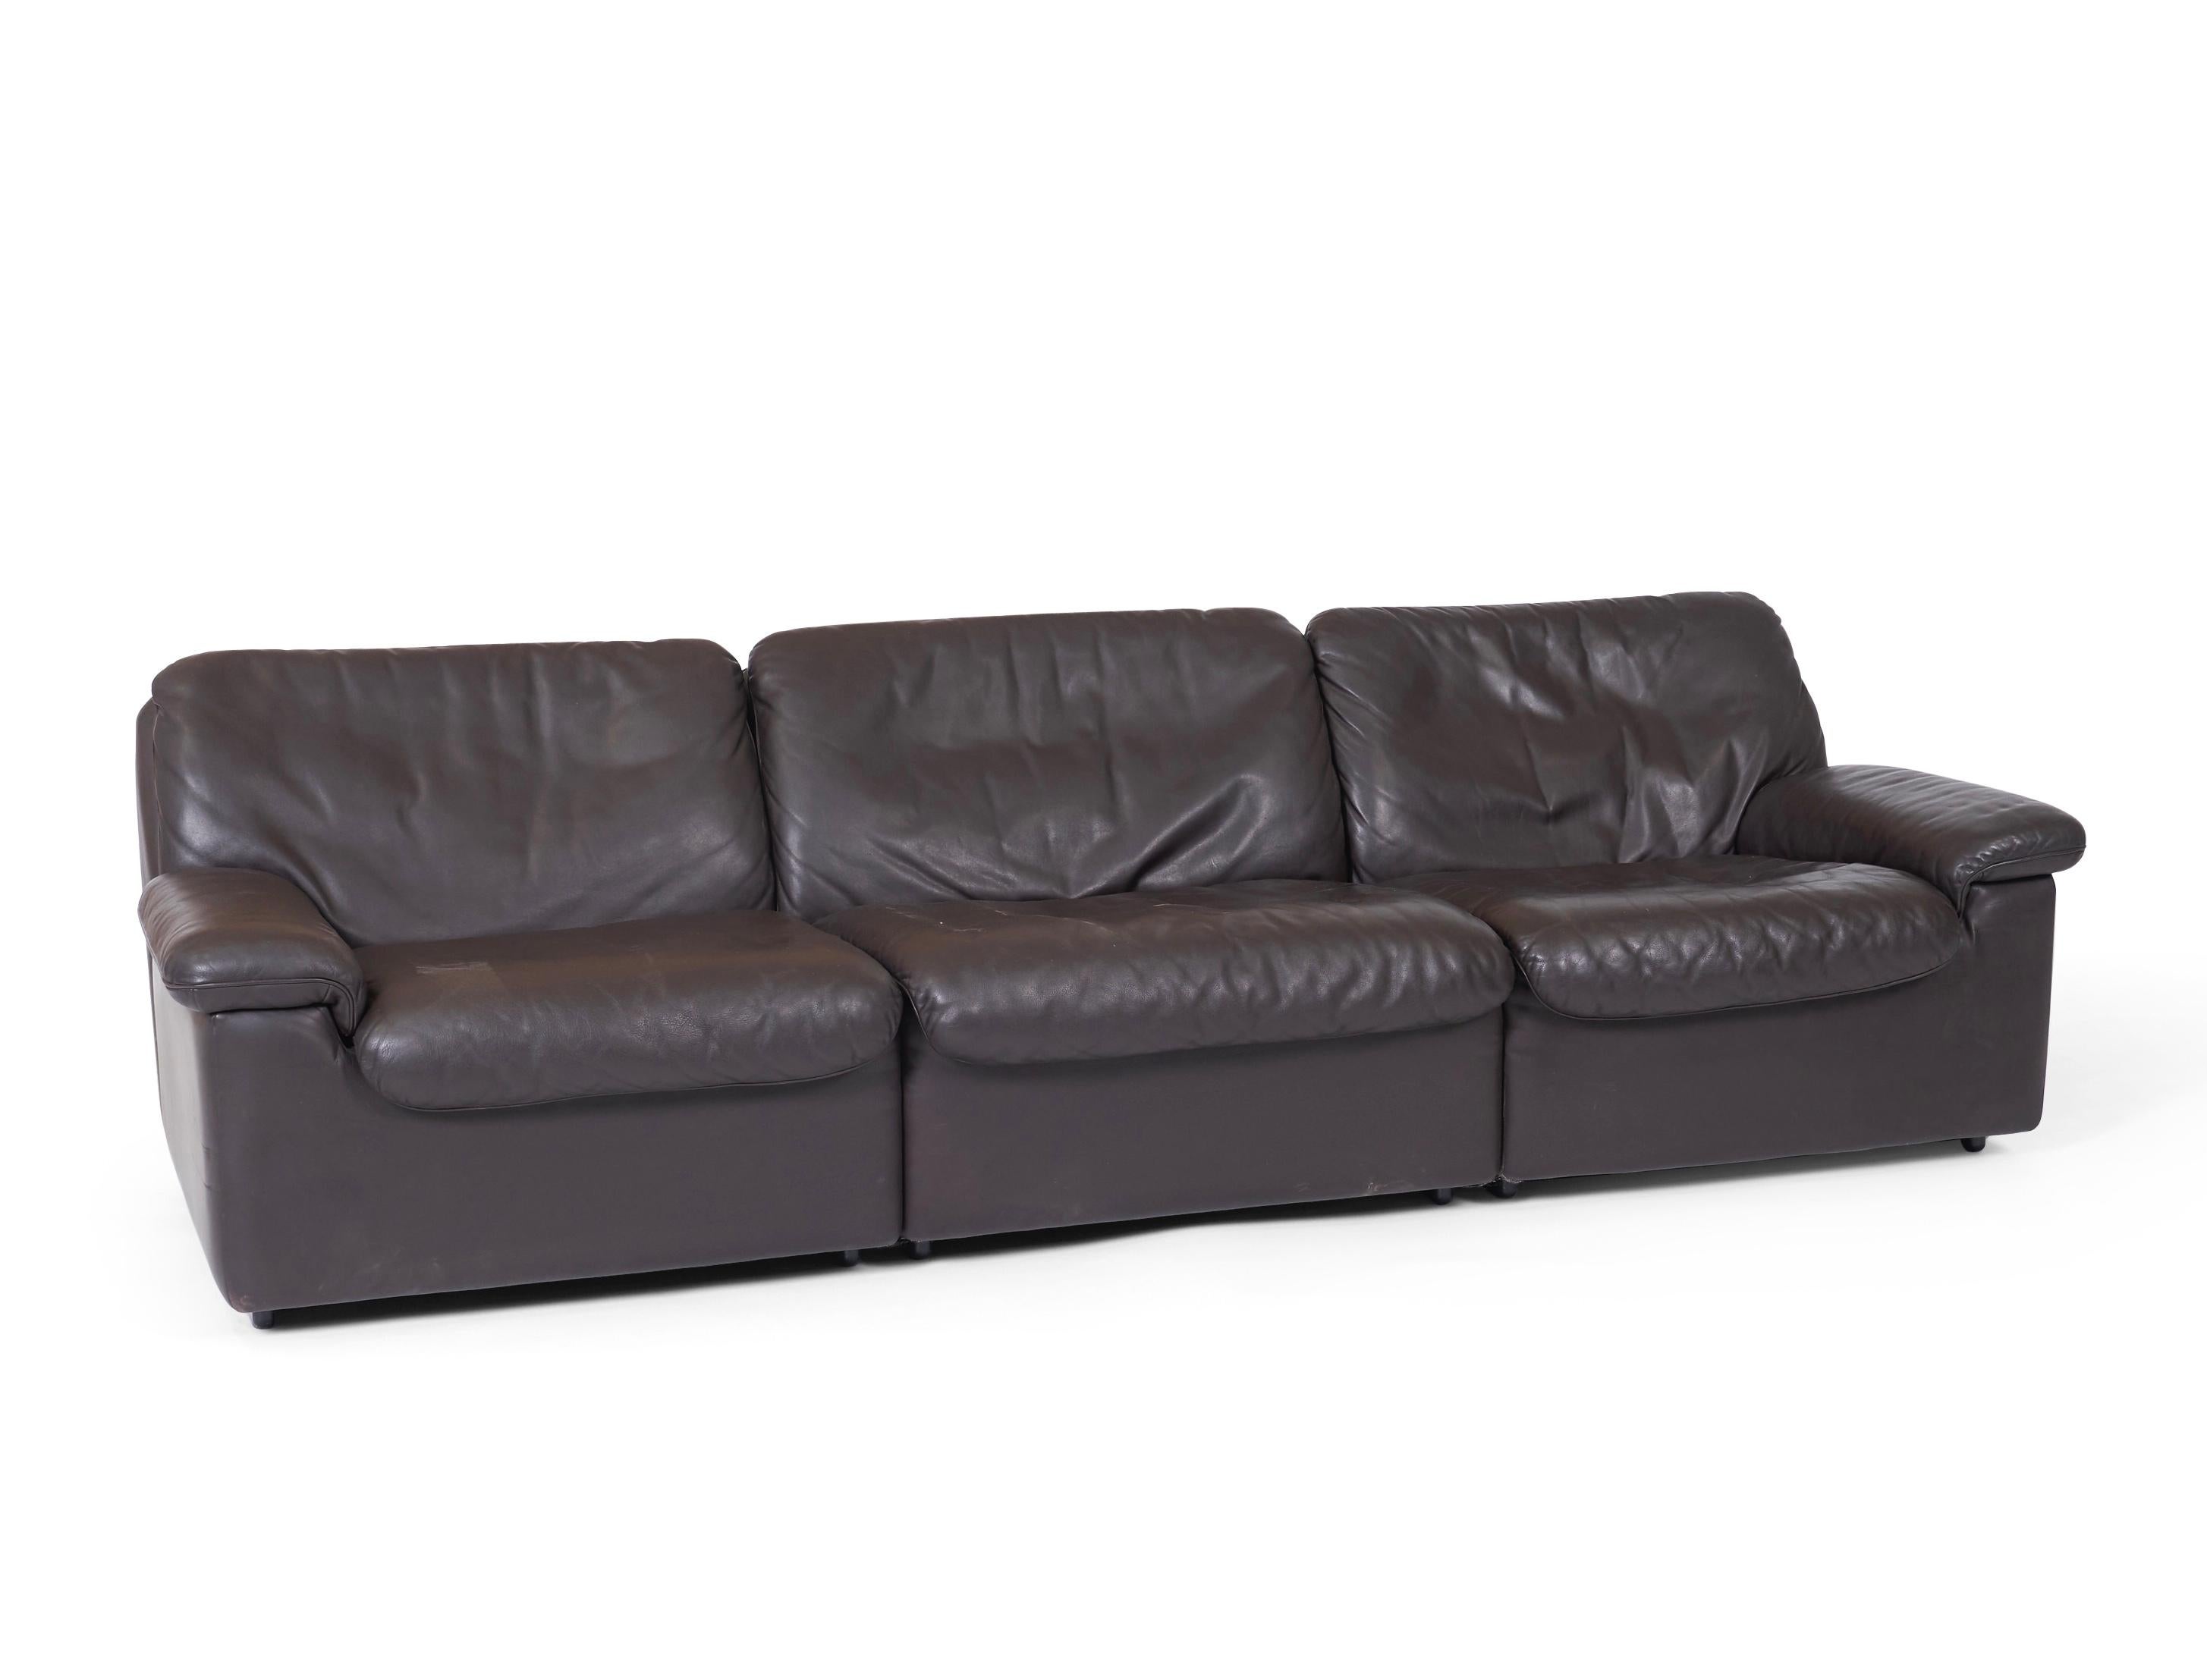 3-seat dark brown leather sofa. Switzerland, 1960s, by De Sede using some of the finest leather available.
 